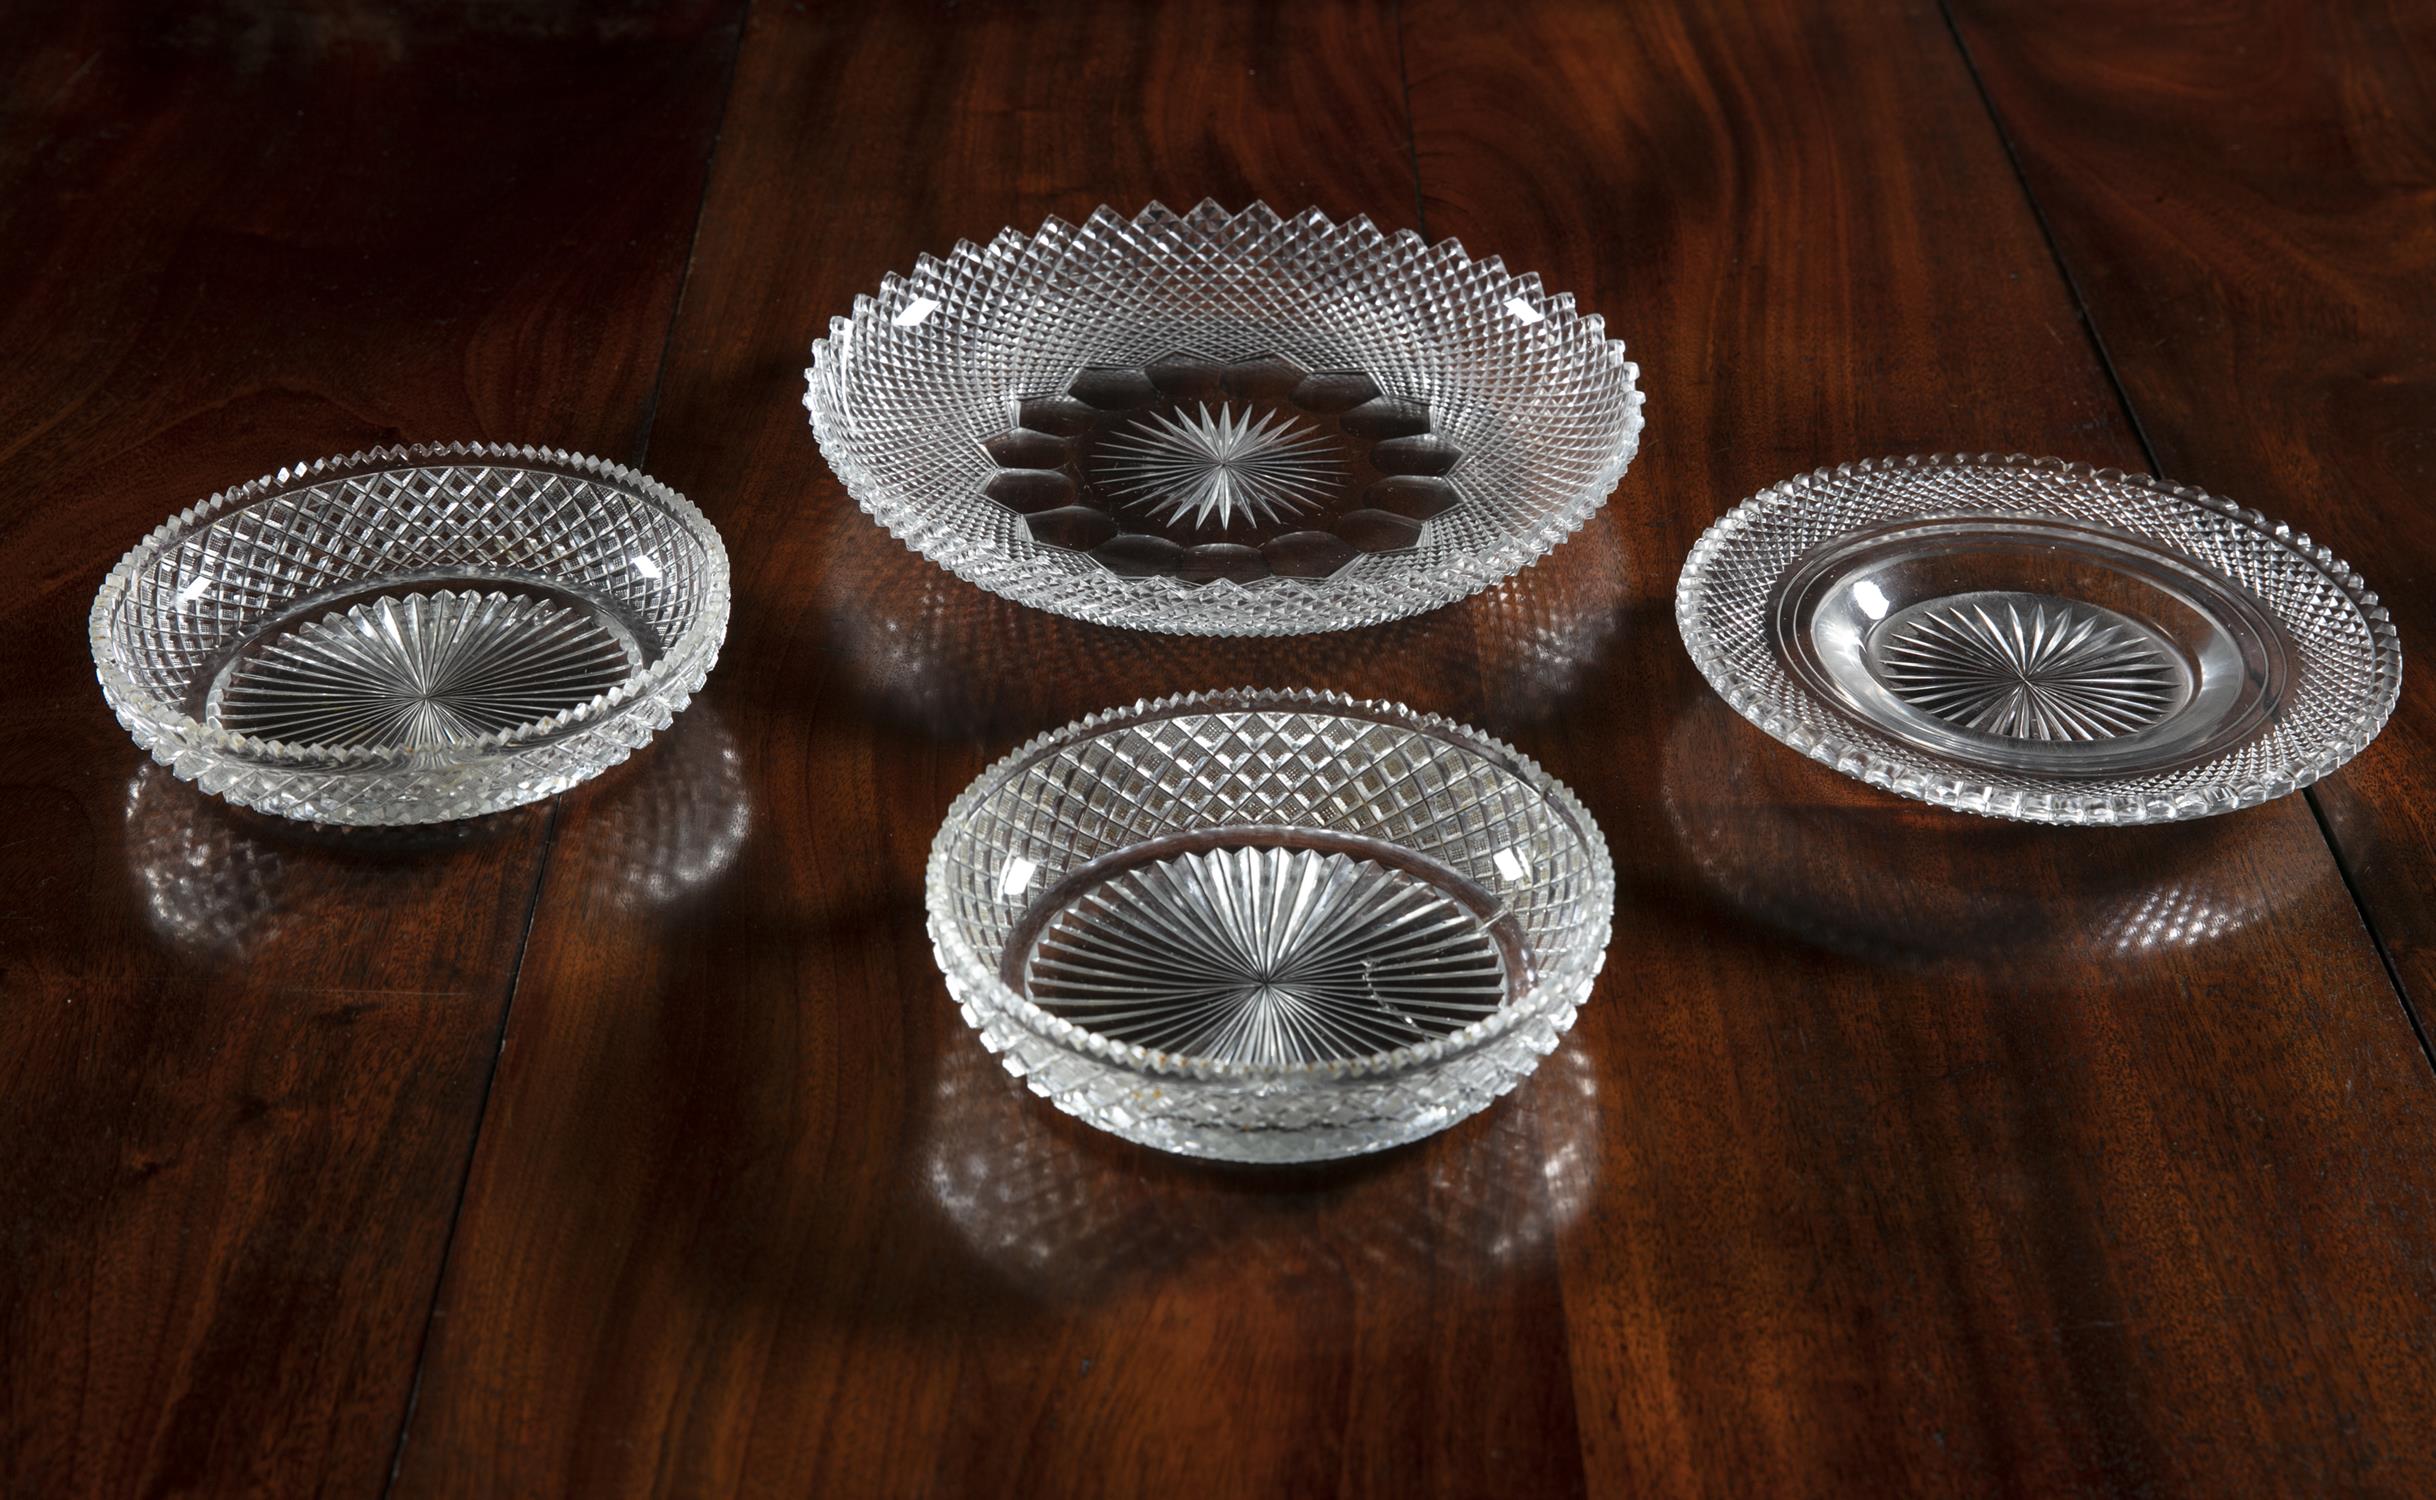 A COLLECTION OF FOUR CUT GLASS DISHES, each of different sizes and variations of diamond cut and